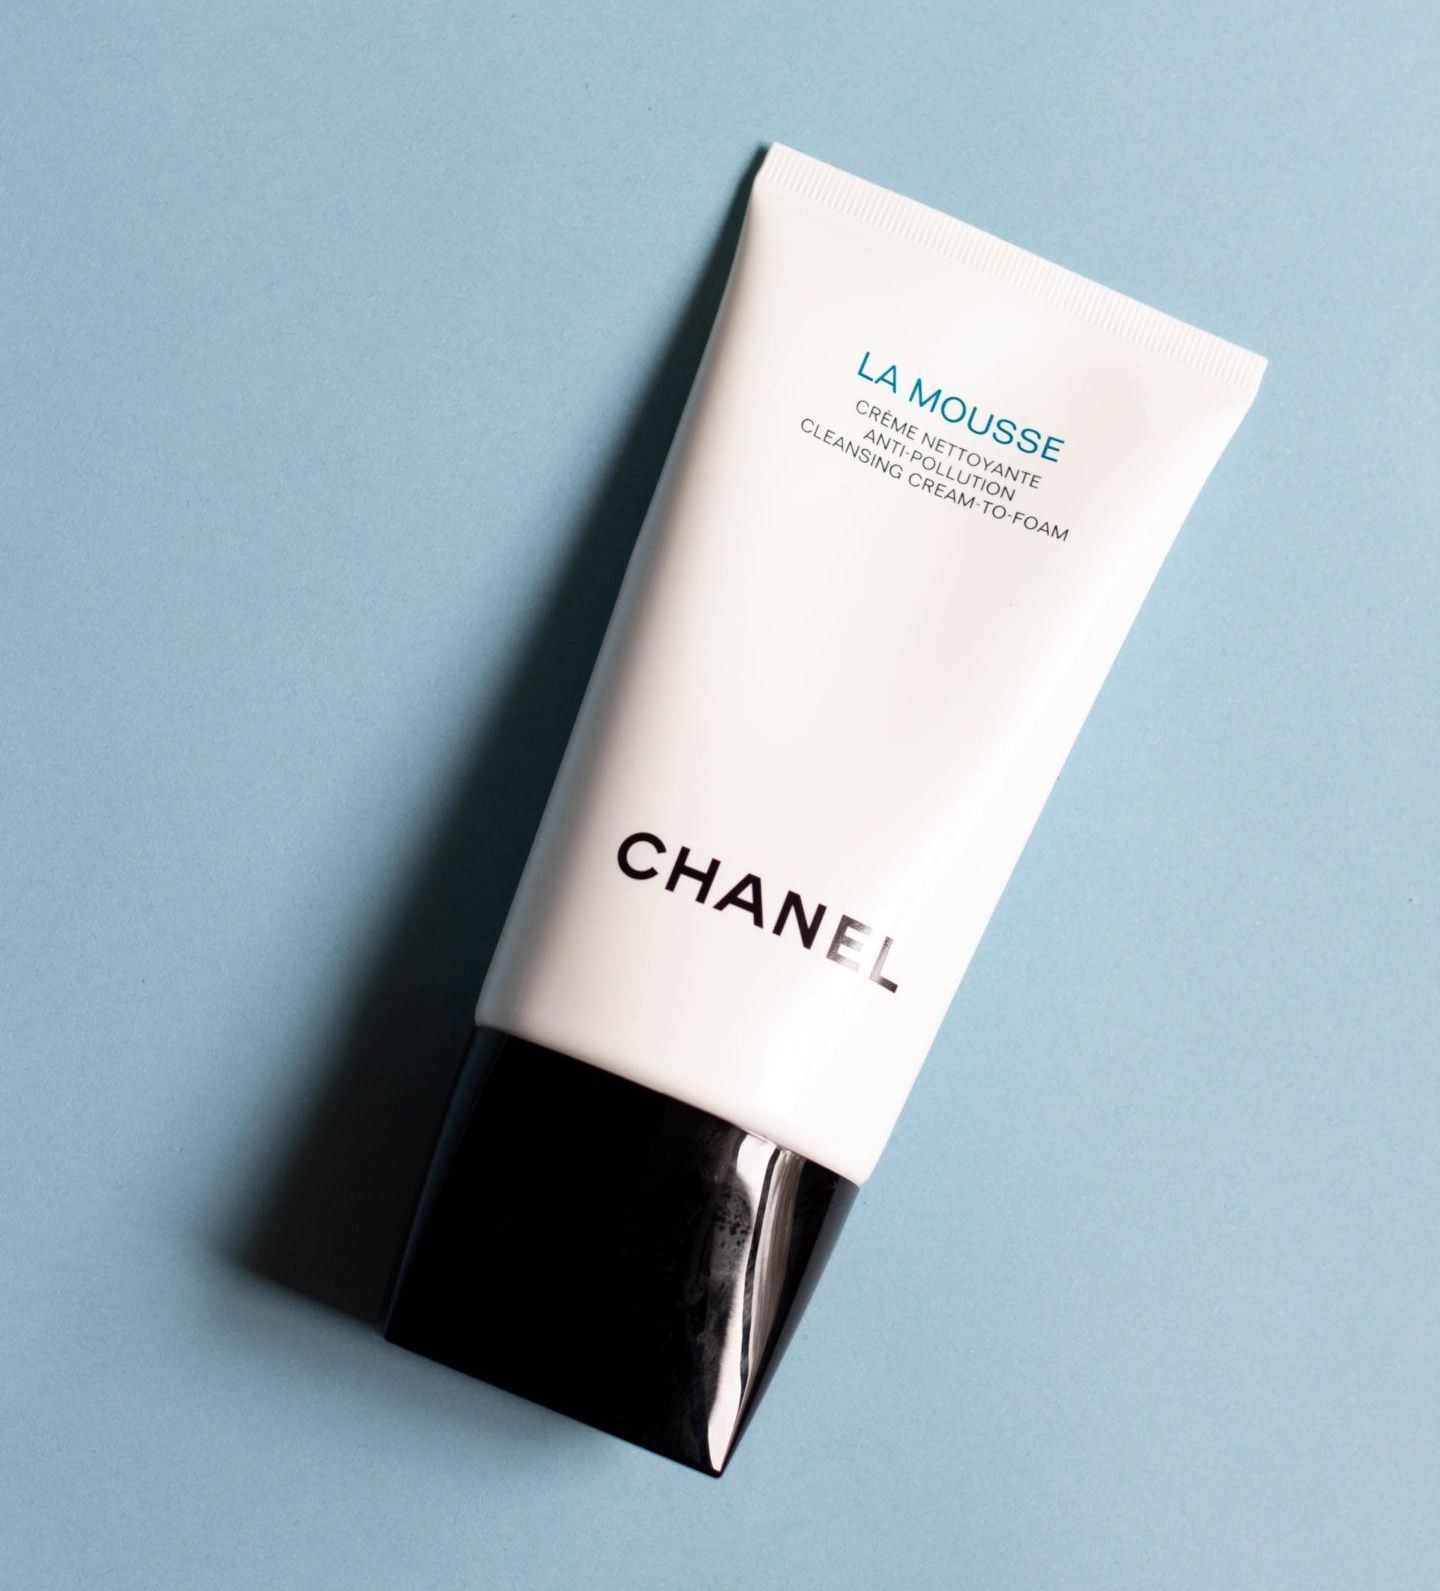 chanel-la-mousse-cream-to-foam-cleanser-review---the-luxe-minimalist